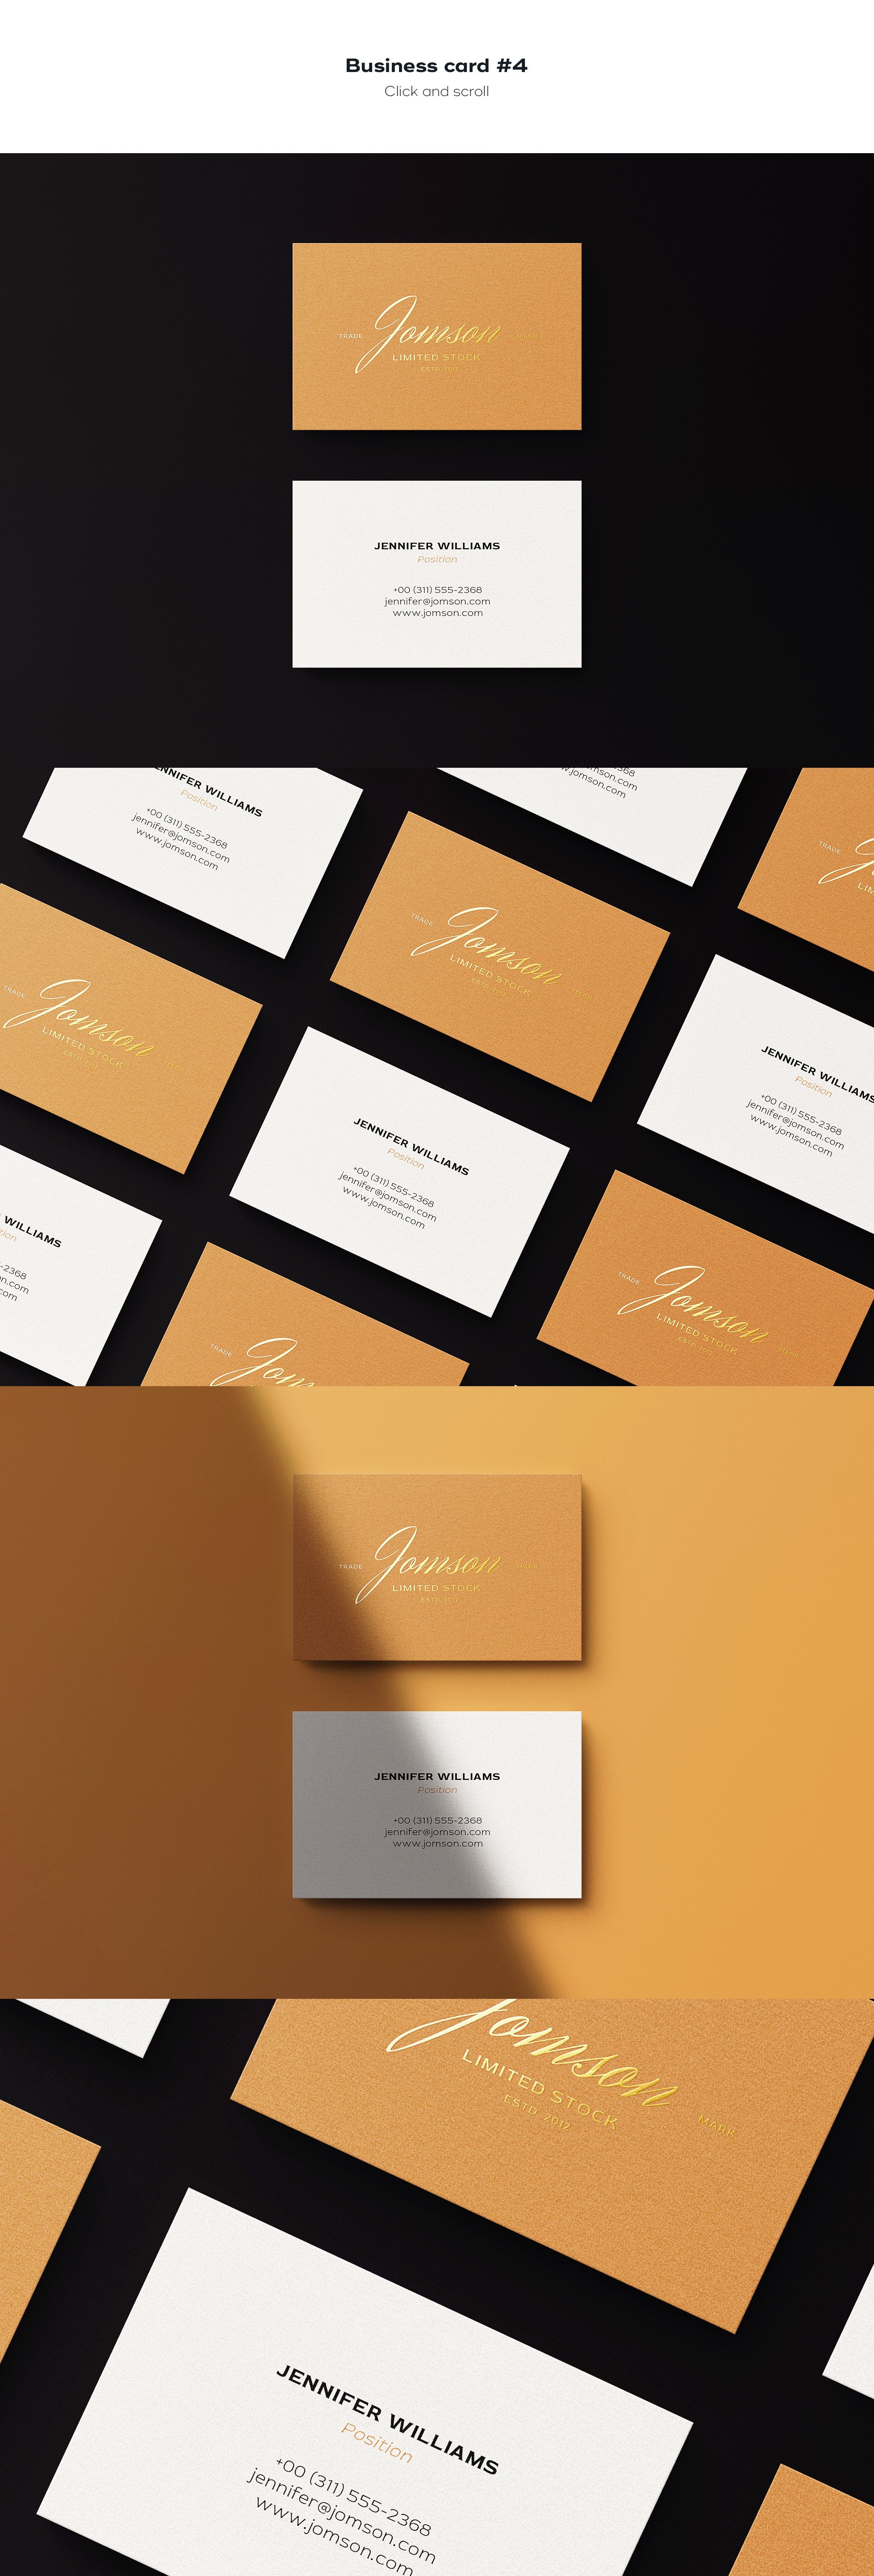 business card 4 332